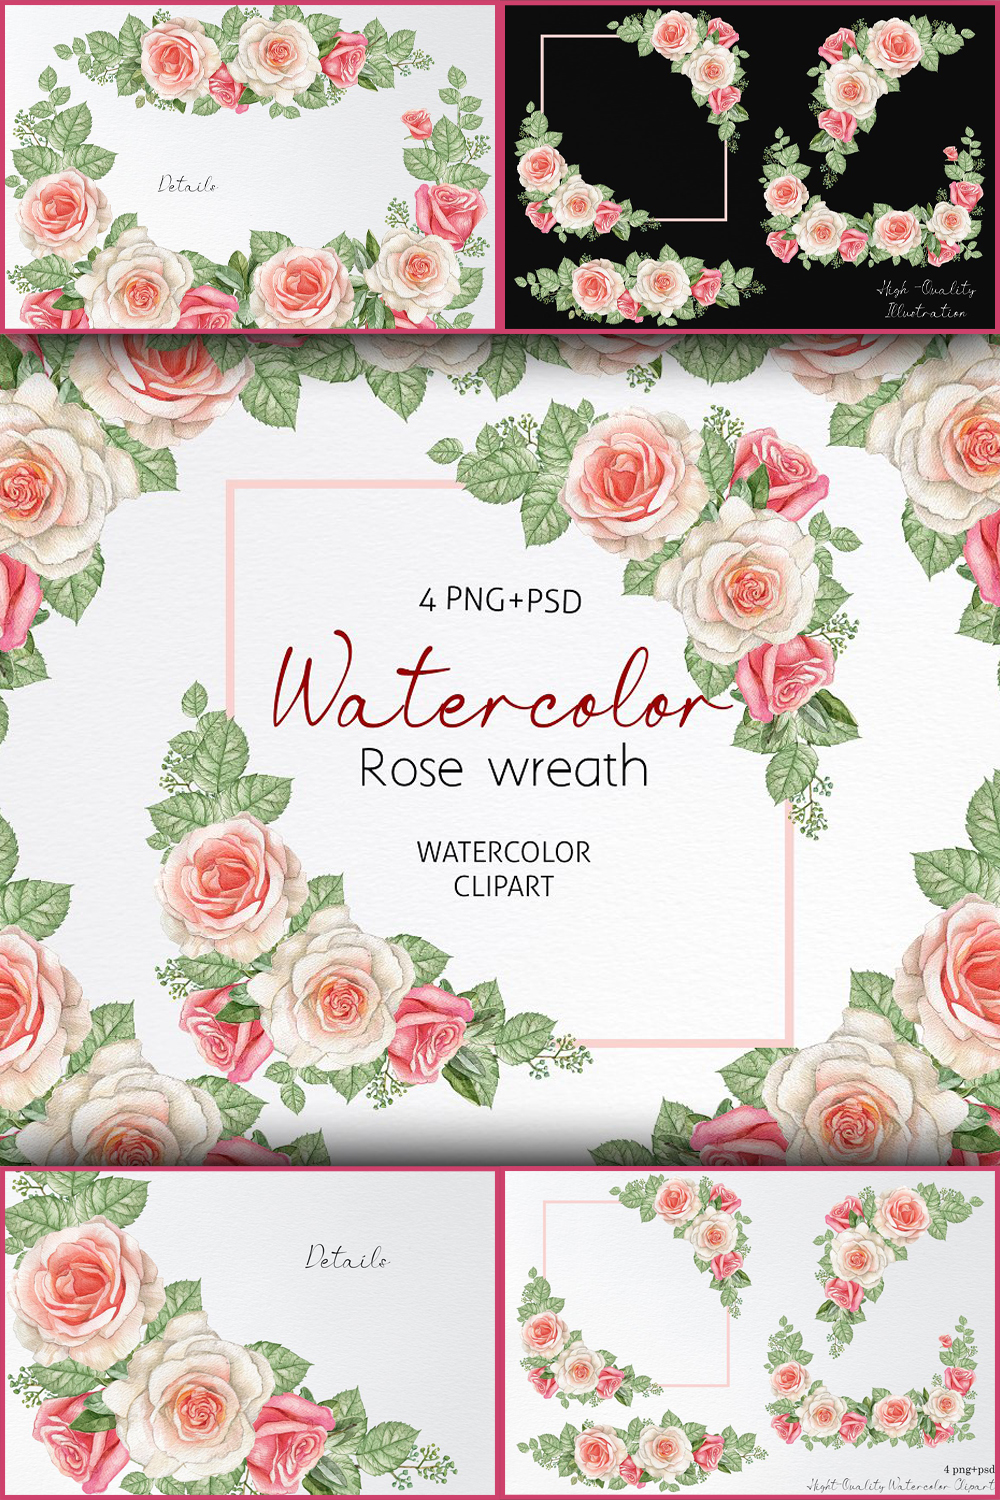 Watercolor dusty rose frame clipart of pinterest.